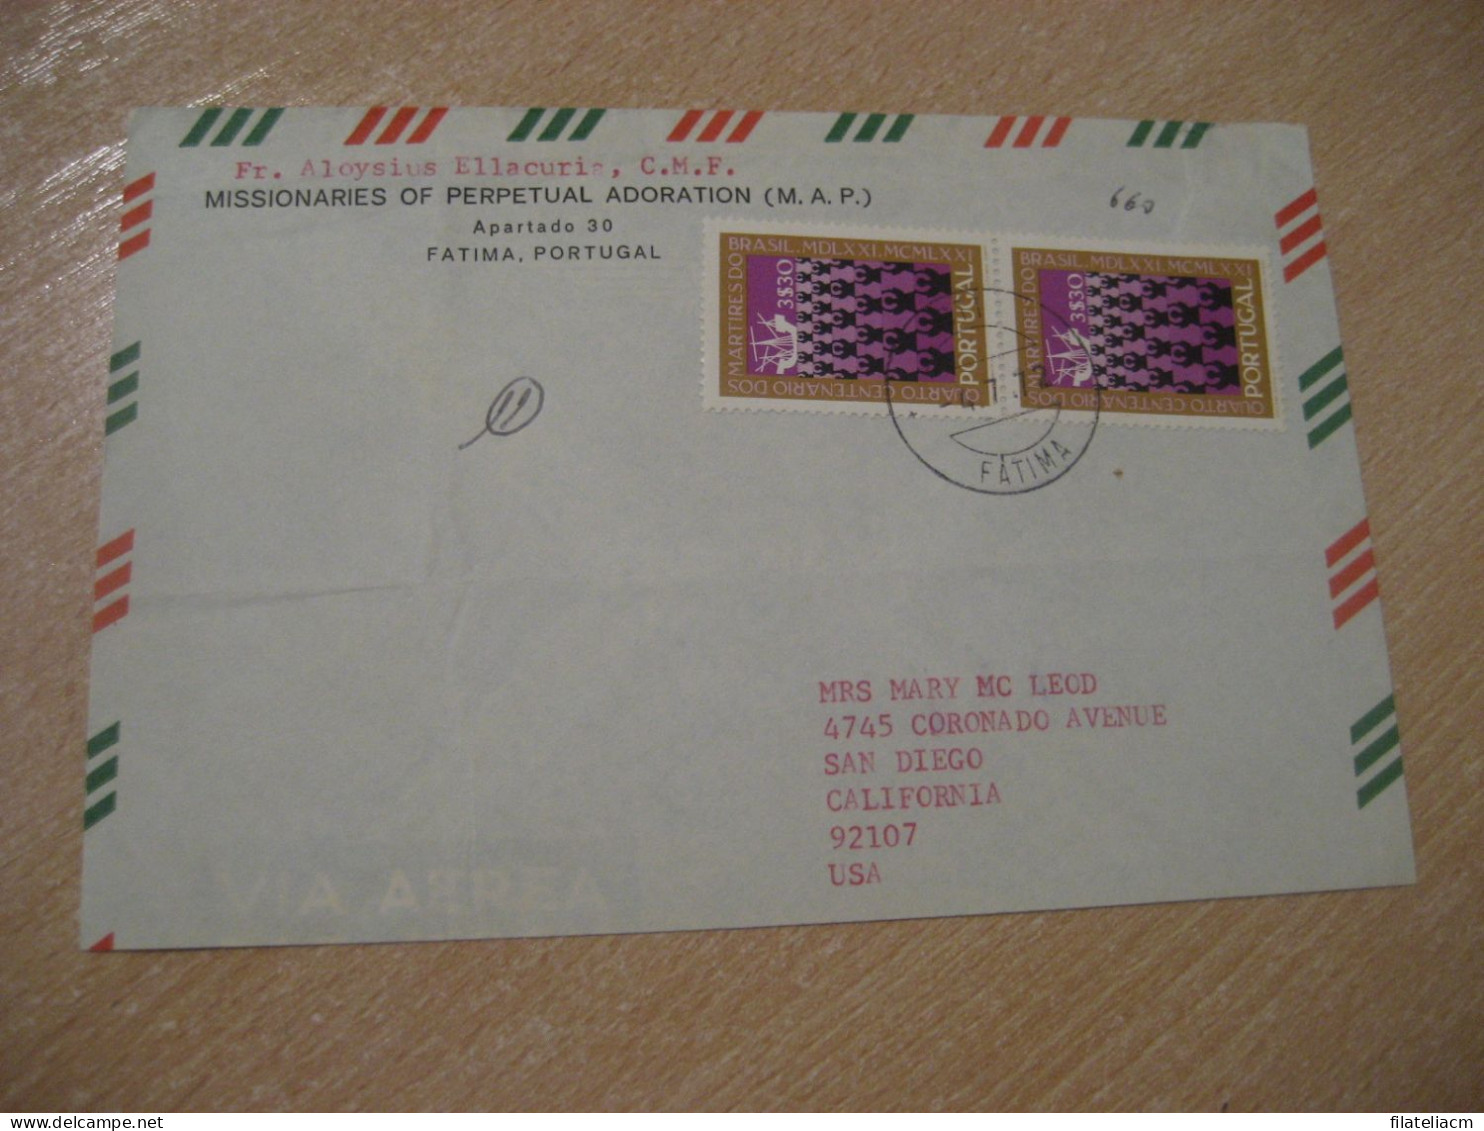 FATIMA 1972 To San Diego USA Missionaries Of Perpetual Adoration Religion Cancel Cover PORTUGAL - Christentum